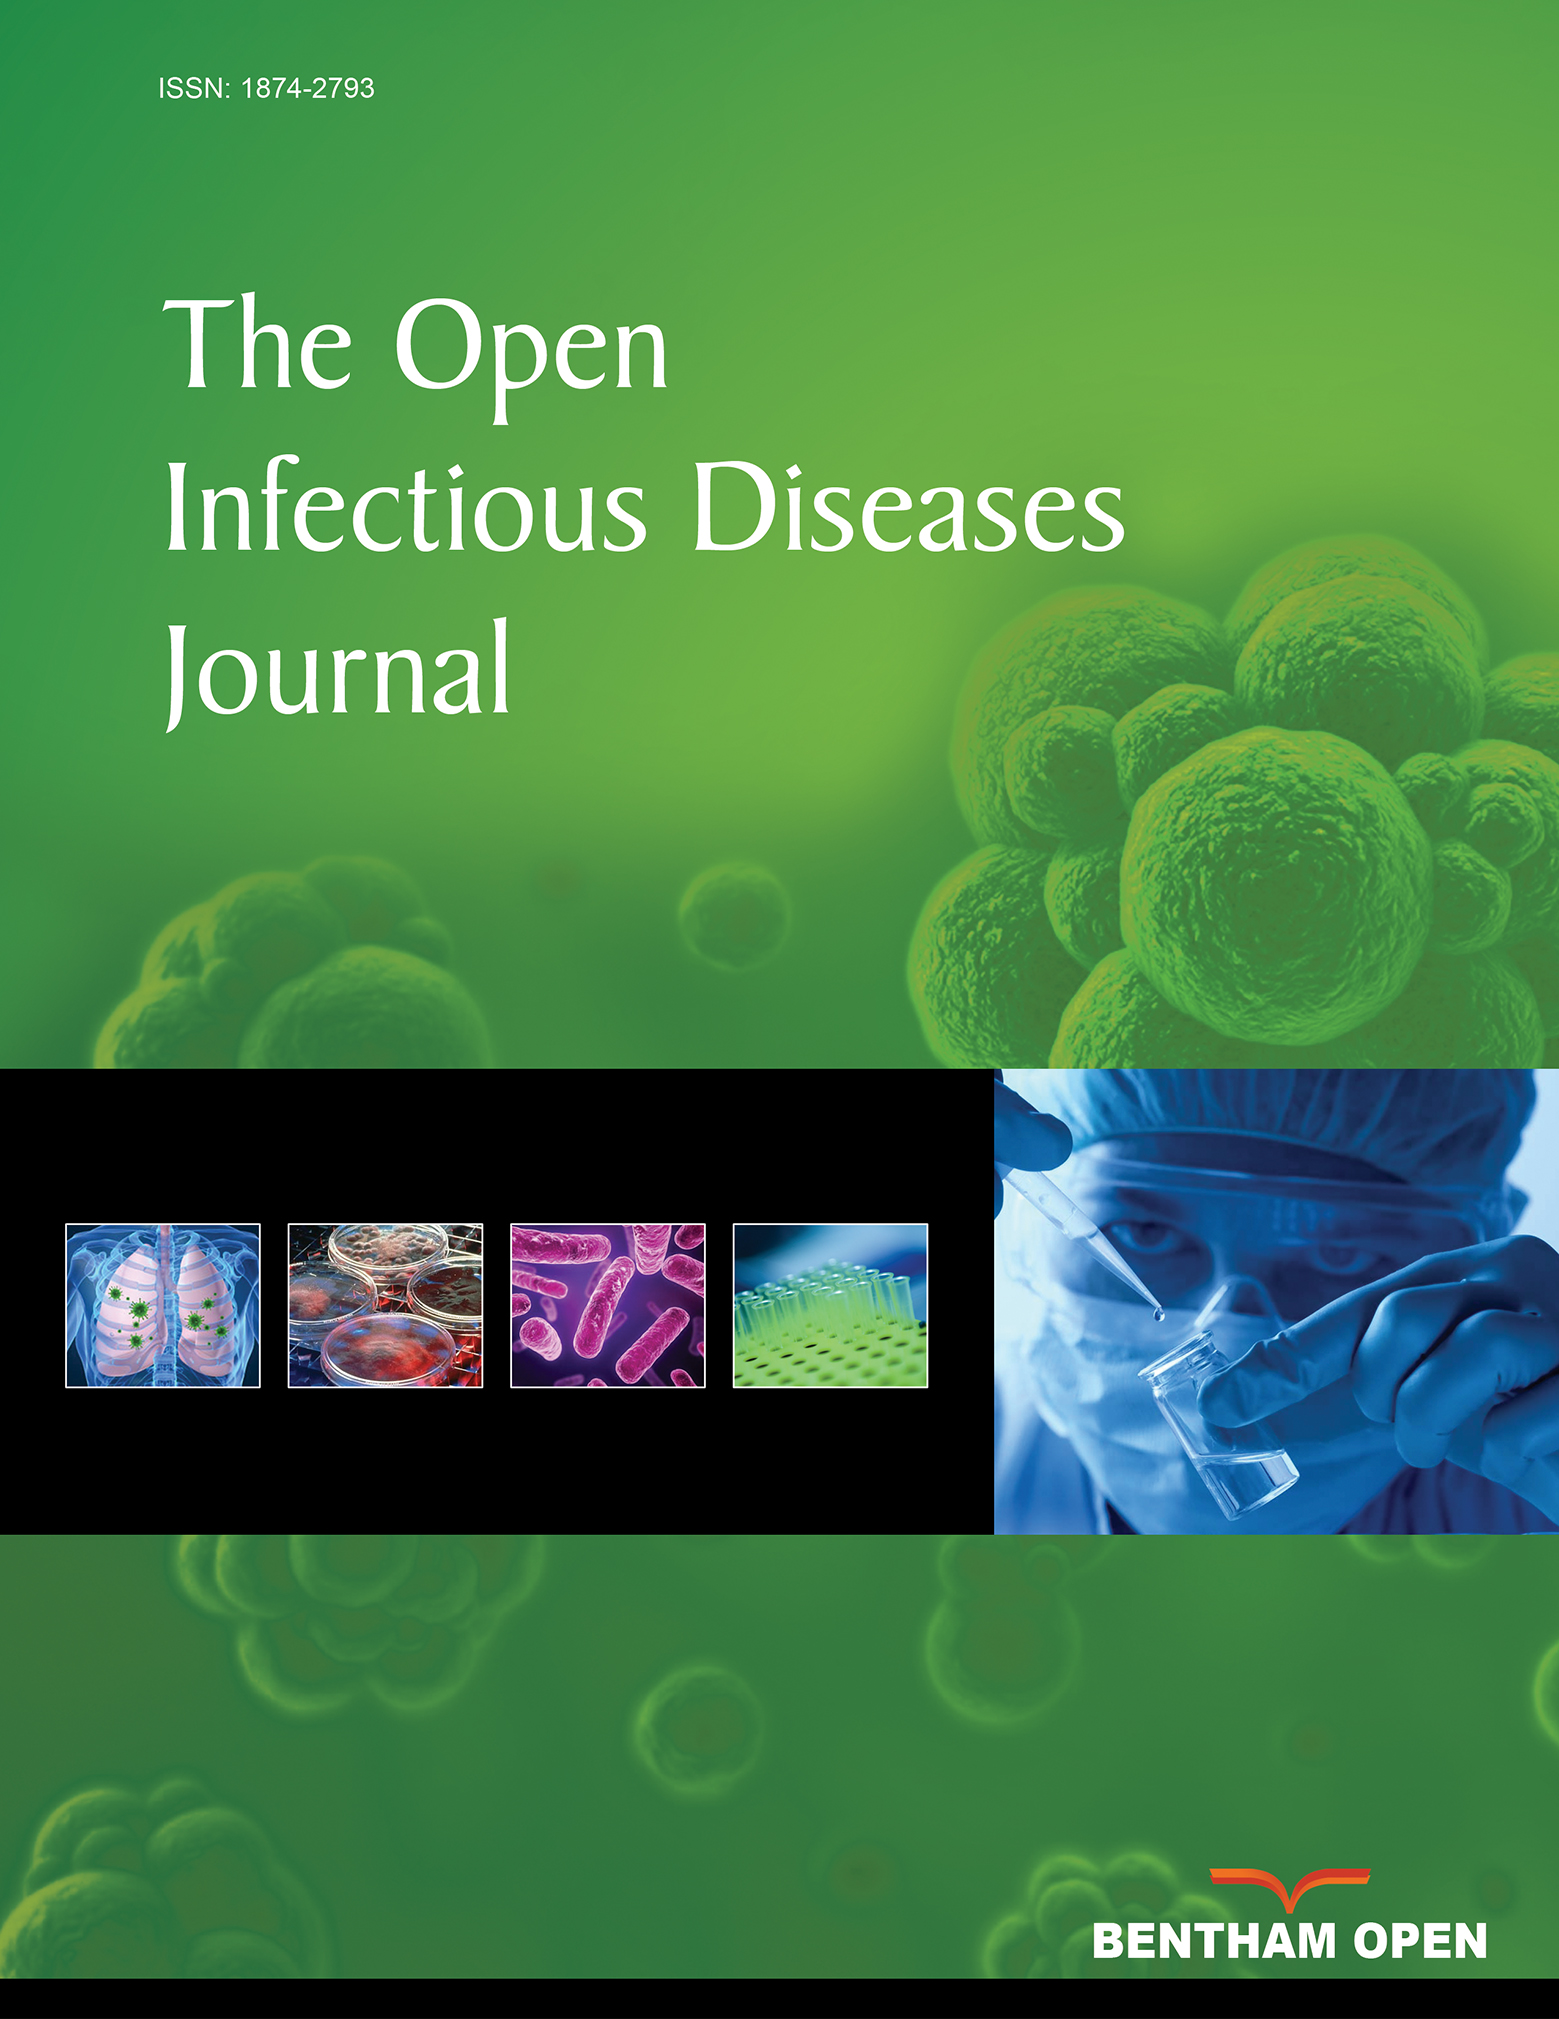 The Open Infectious Diseases Journal